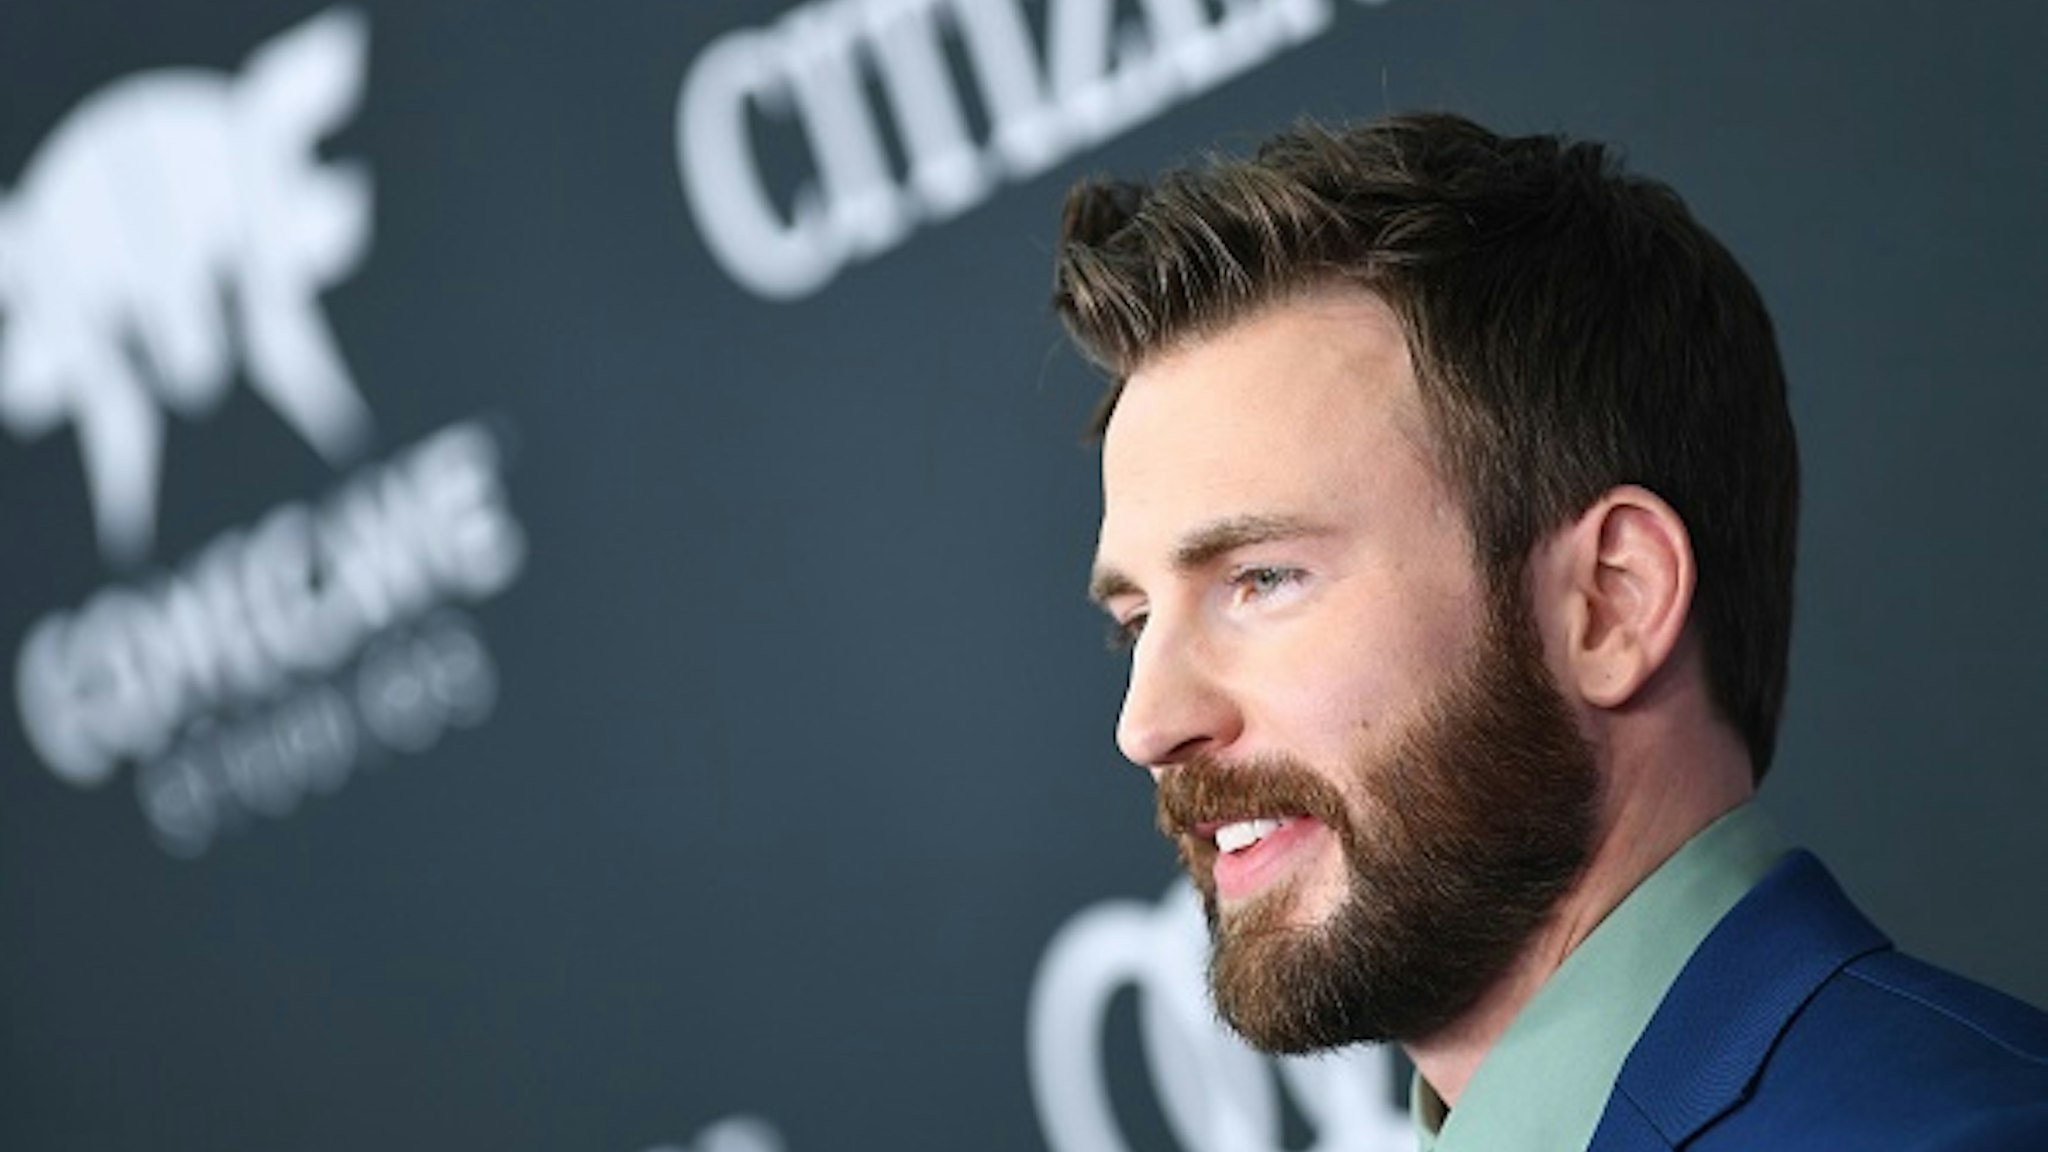 US actor Chris Evans arrives for the World premiere of Marvel Studios' "Avengers: Endgame" at the Los Angeles Convention Center on April 22, 2019 in Los Angeles.